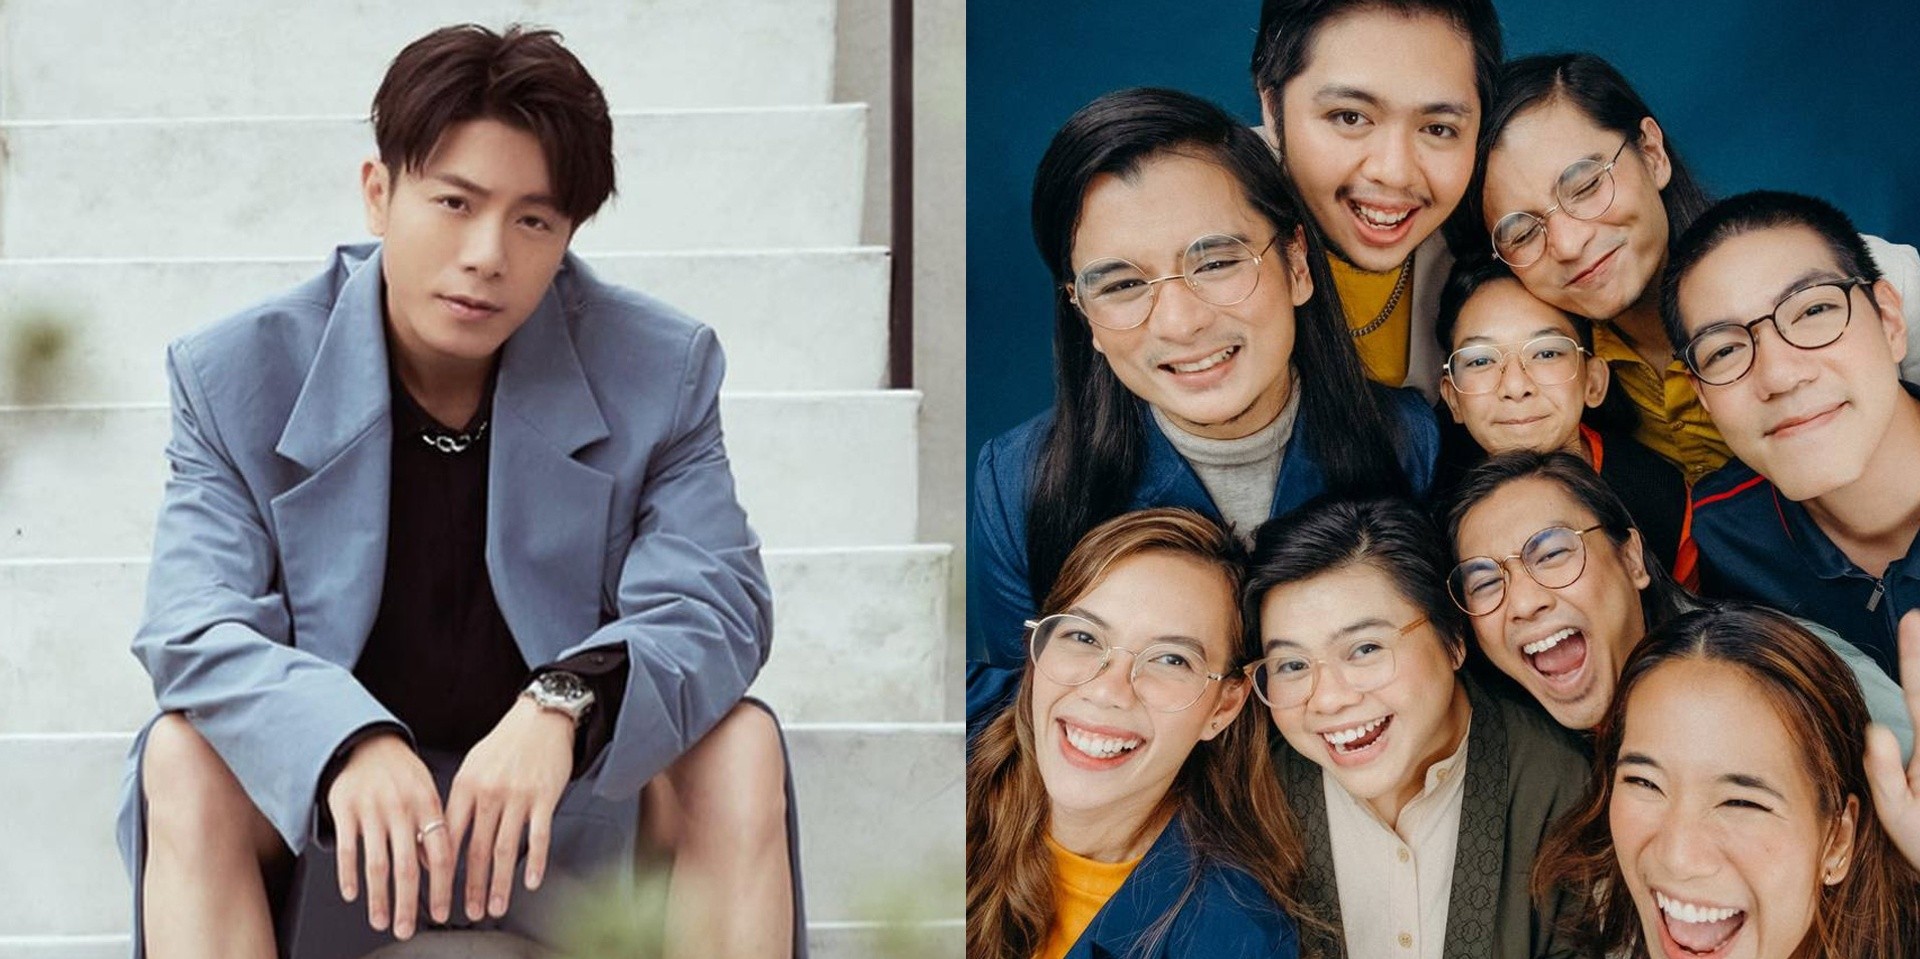 Taiwanase singer-songwriter WeiBird teams up with Filipino band Ben&Ben for new collab 'Cheap Love' – listen